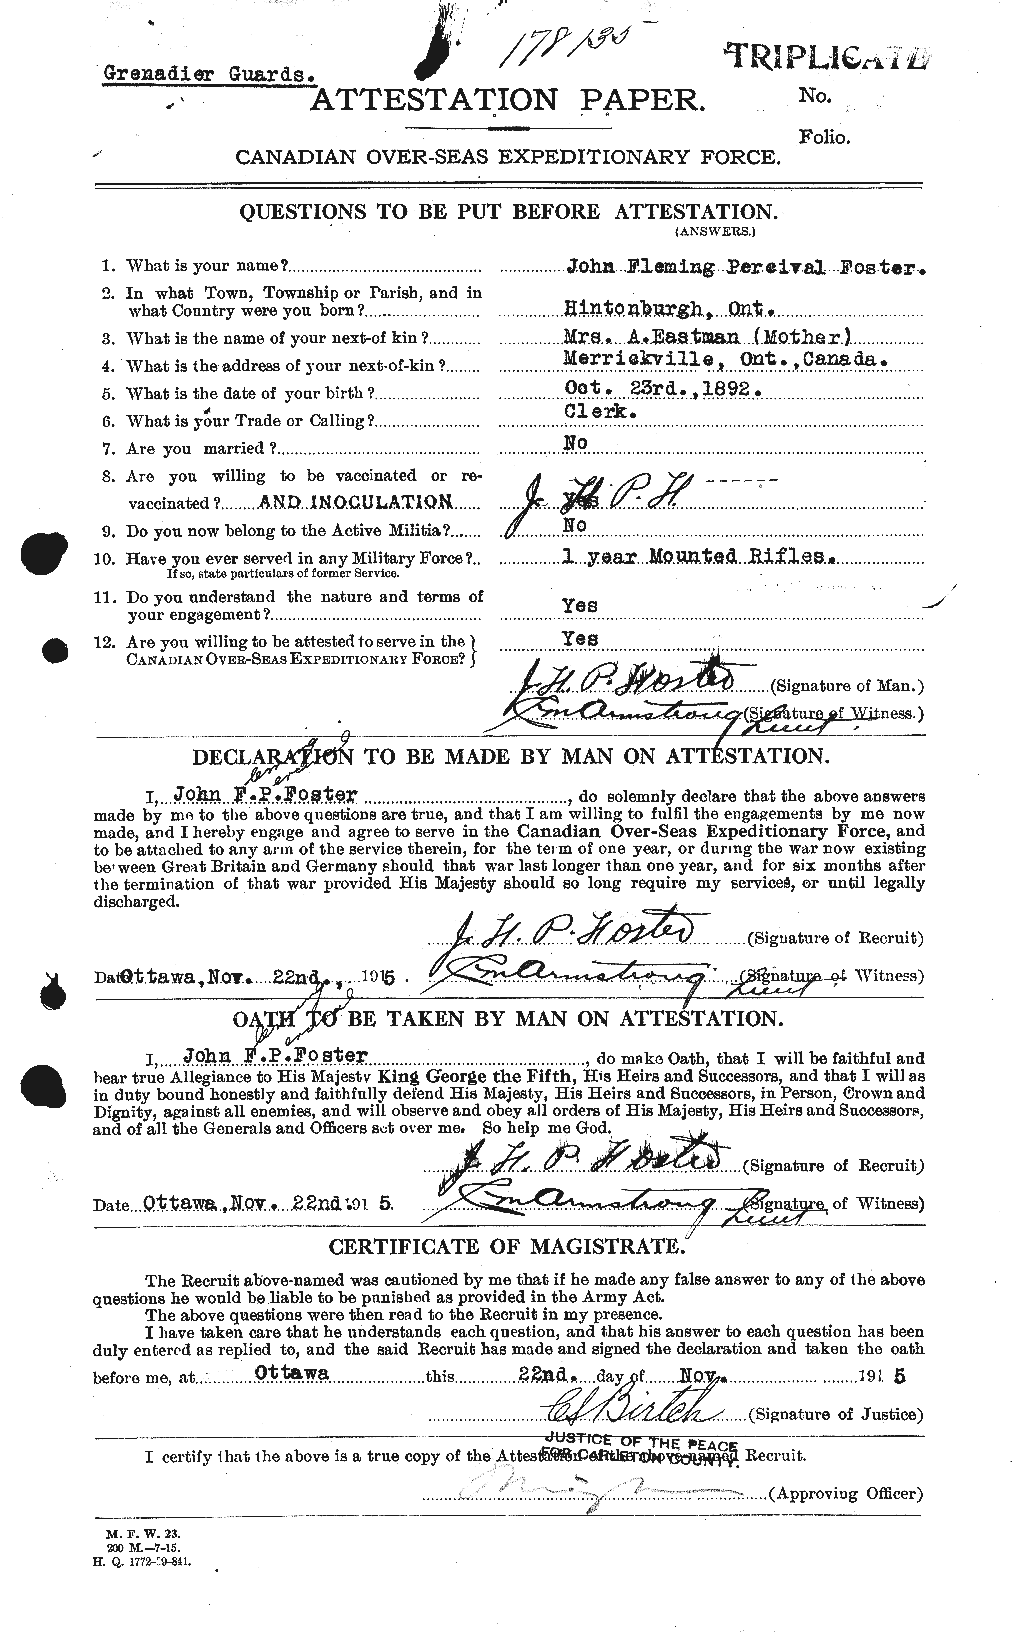 Personnel Records of the First World War - CEF 333358a